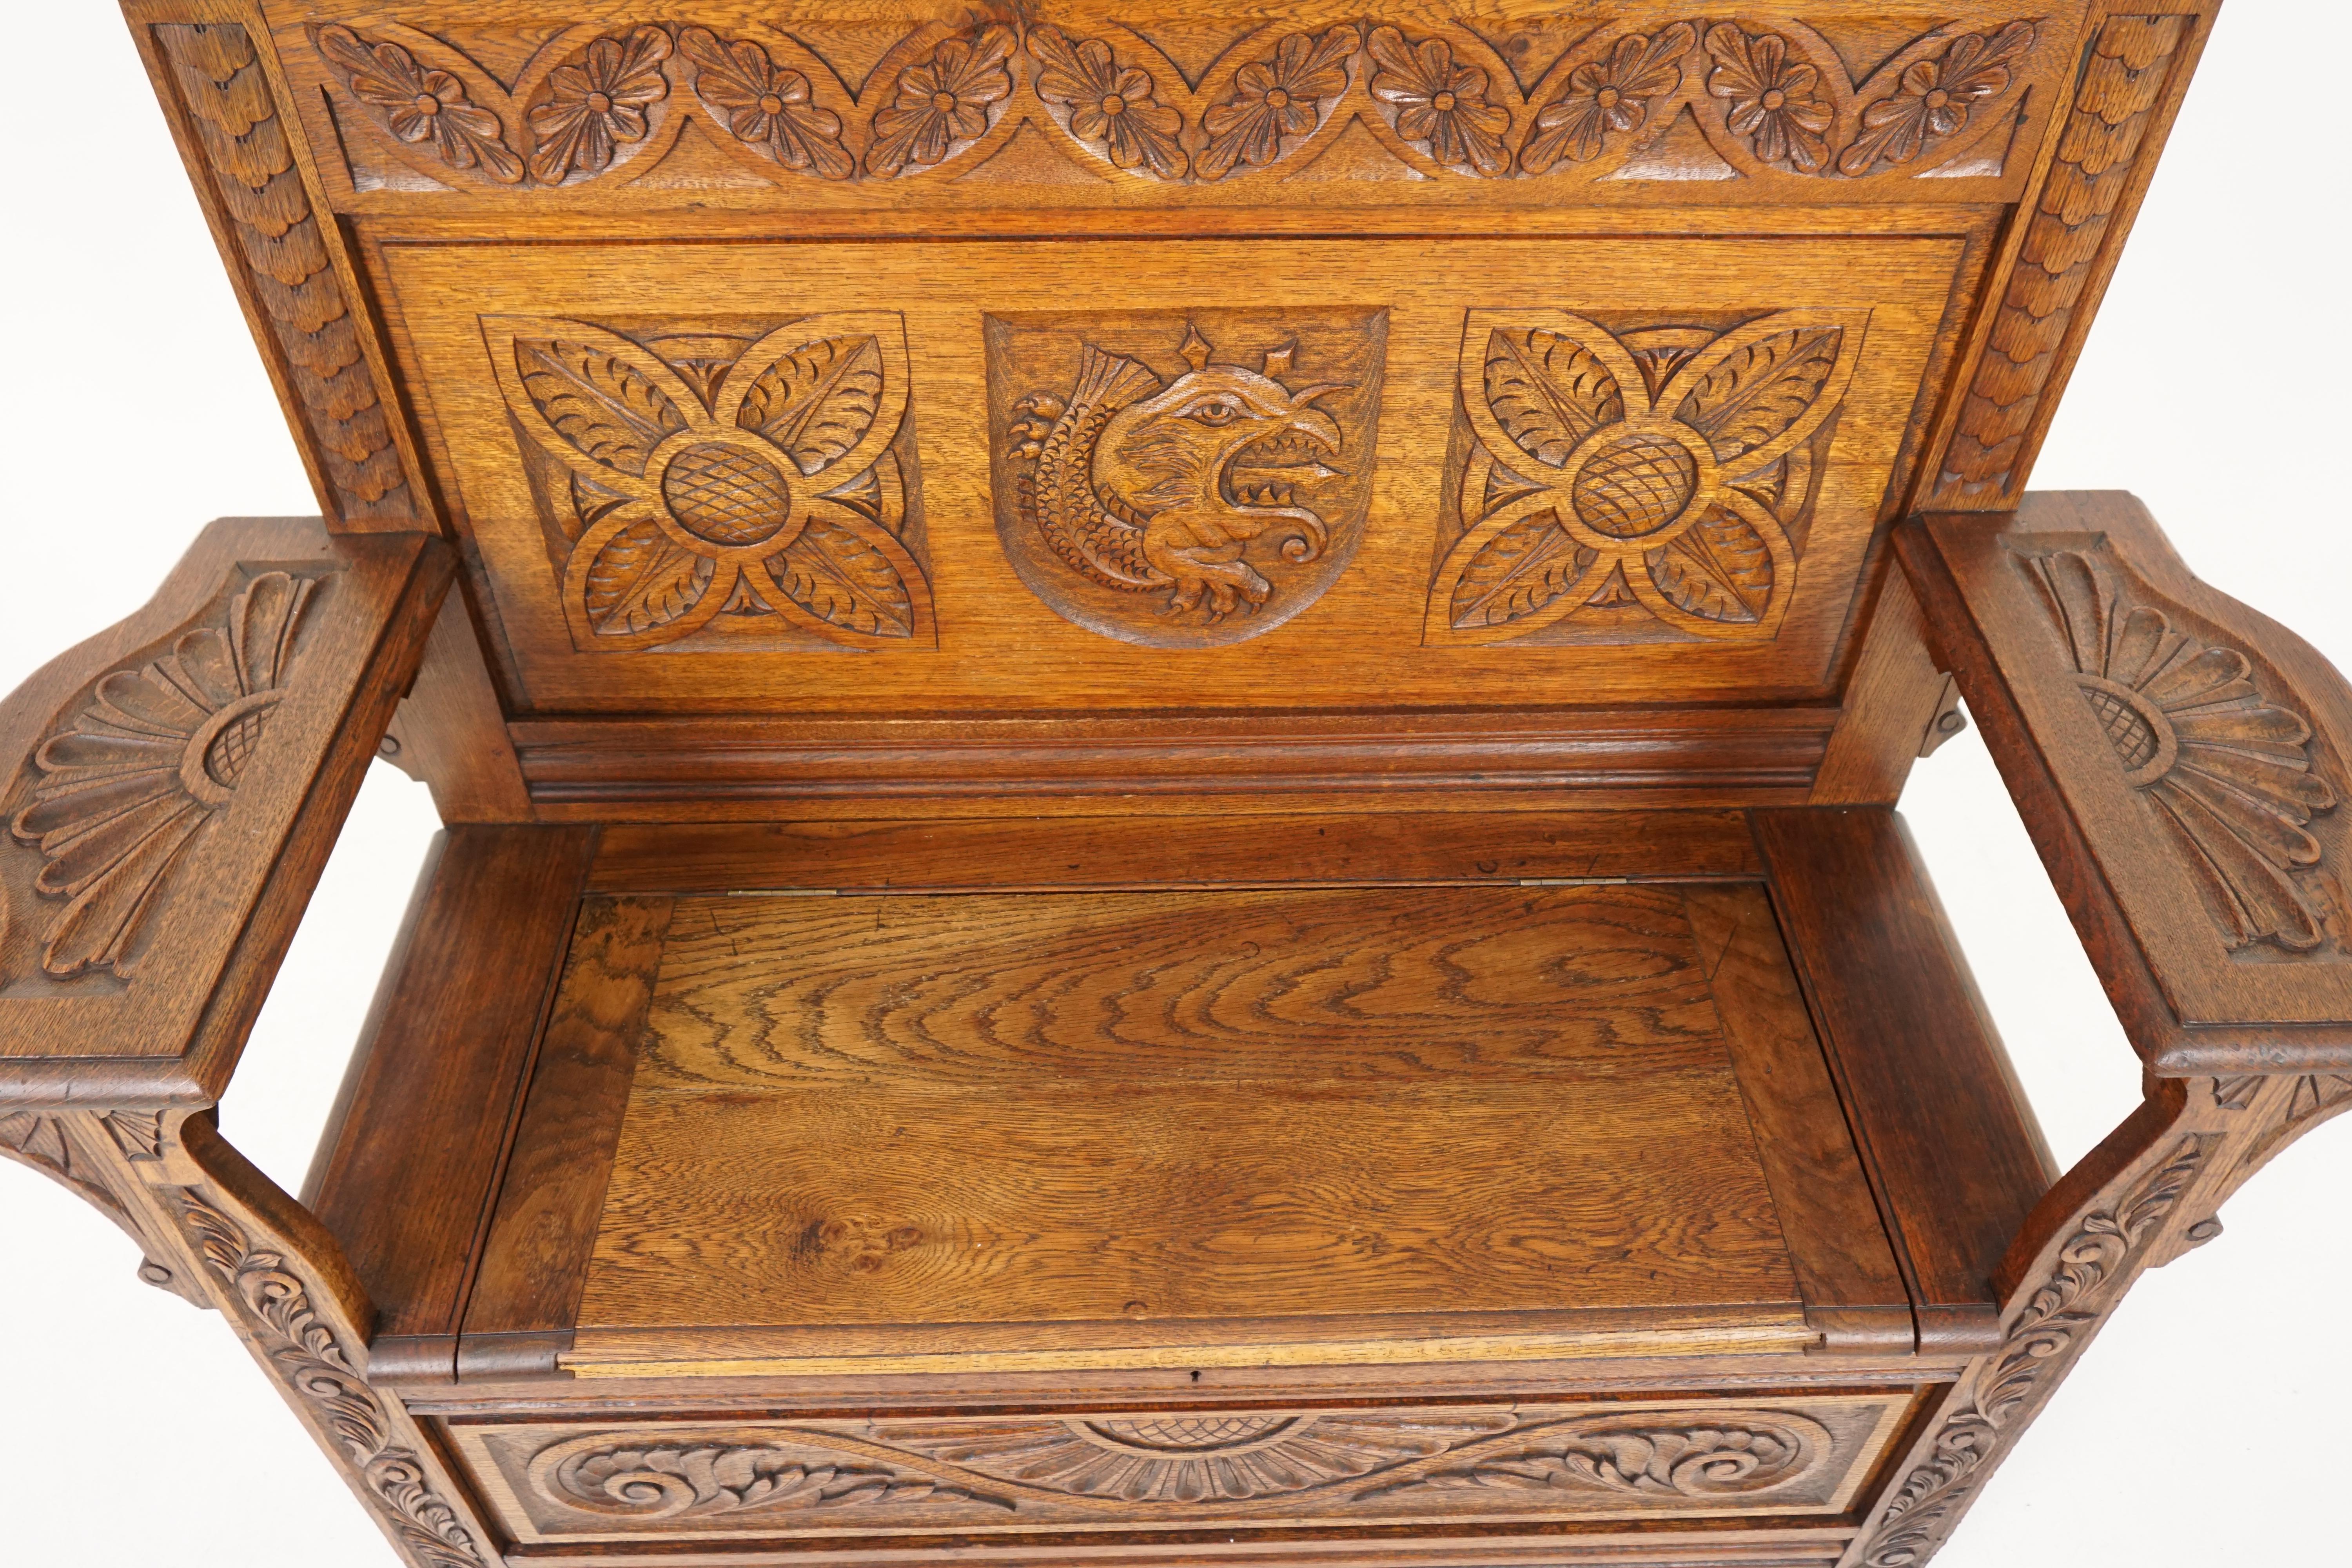 Antique carved bench, Victorian heavily carved oak green man hall bench, antique furniture, Scotland, 1880, B1829

Scotland, 1880
Solid oak
Original finish
Carved pediment top
Carved back panel with central carved sea serpent
Flanked by a